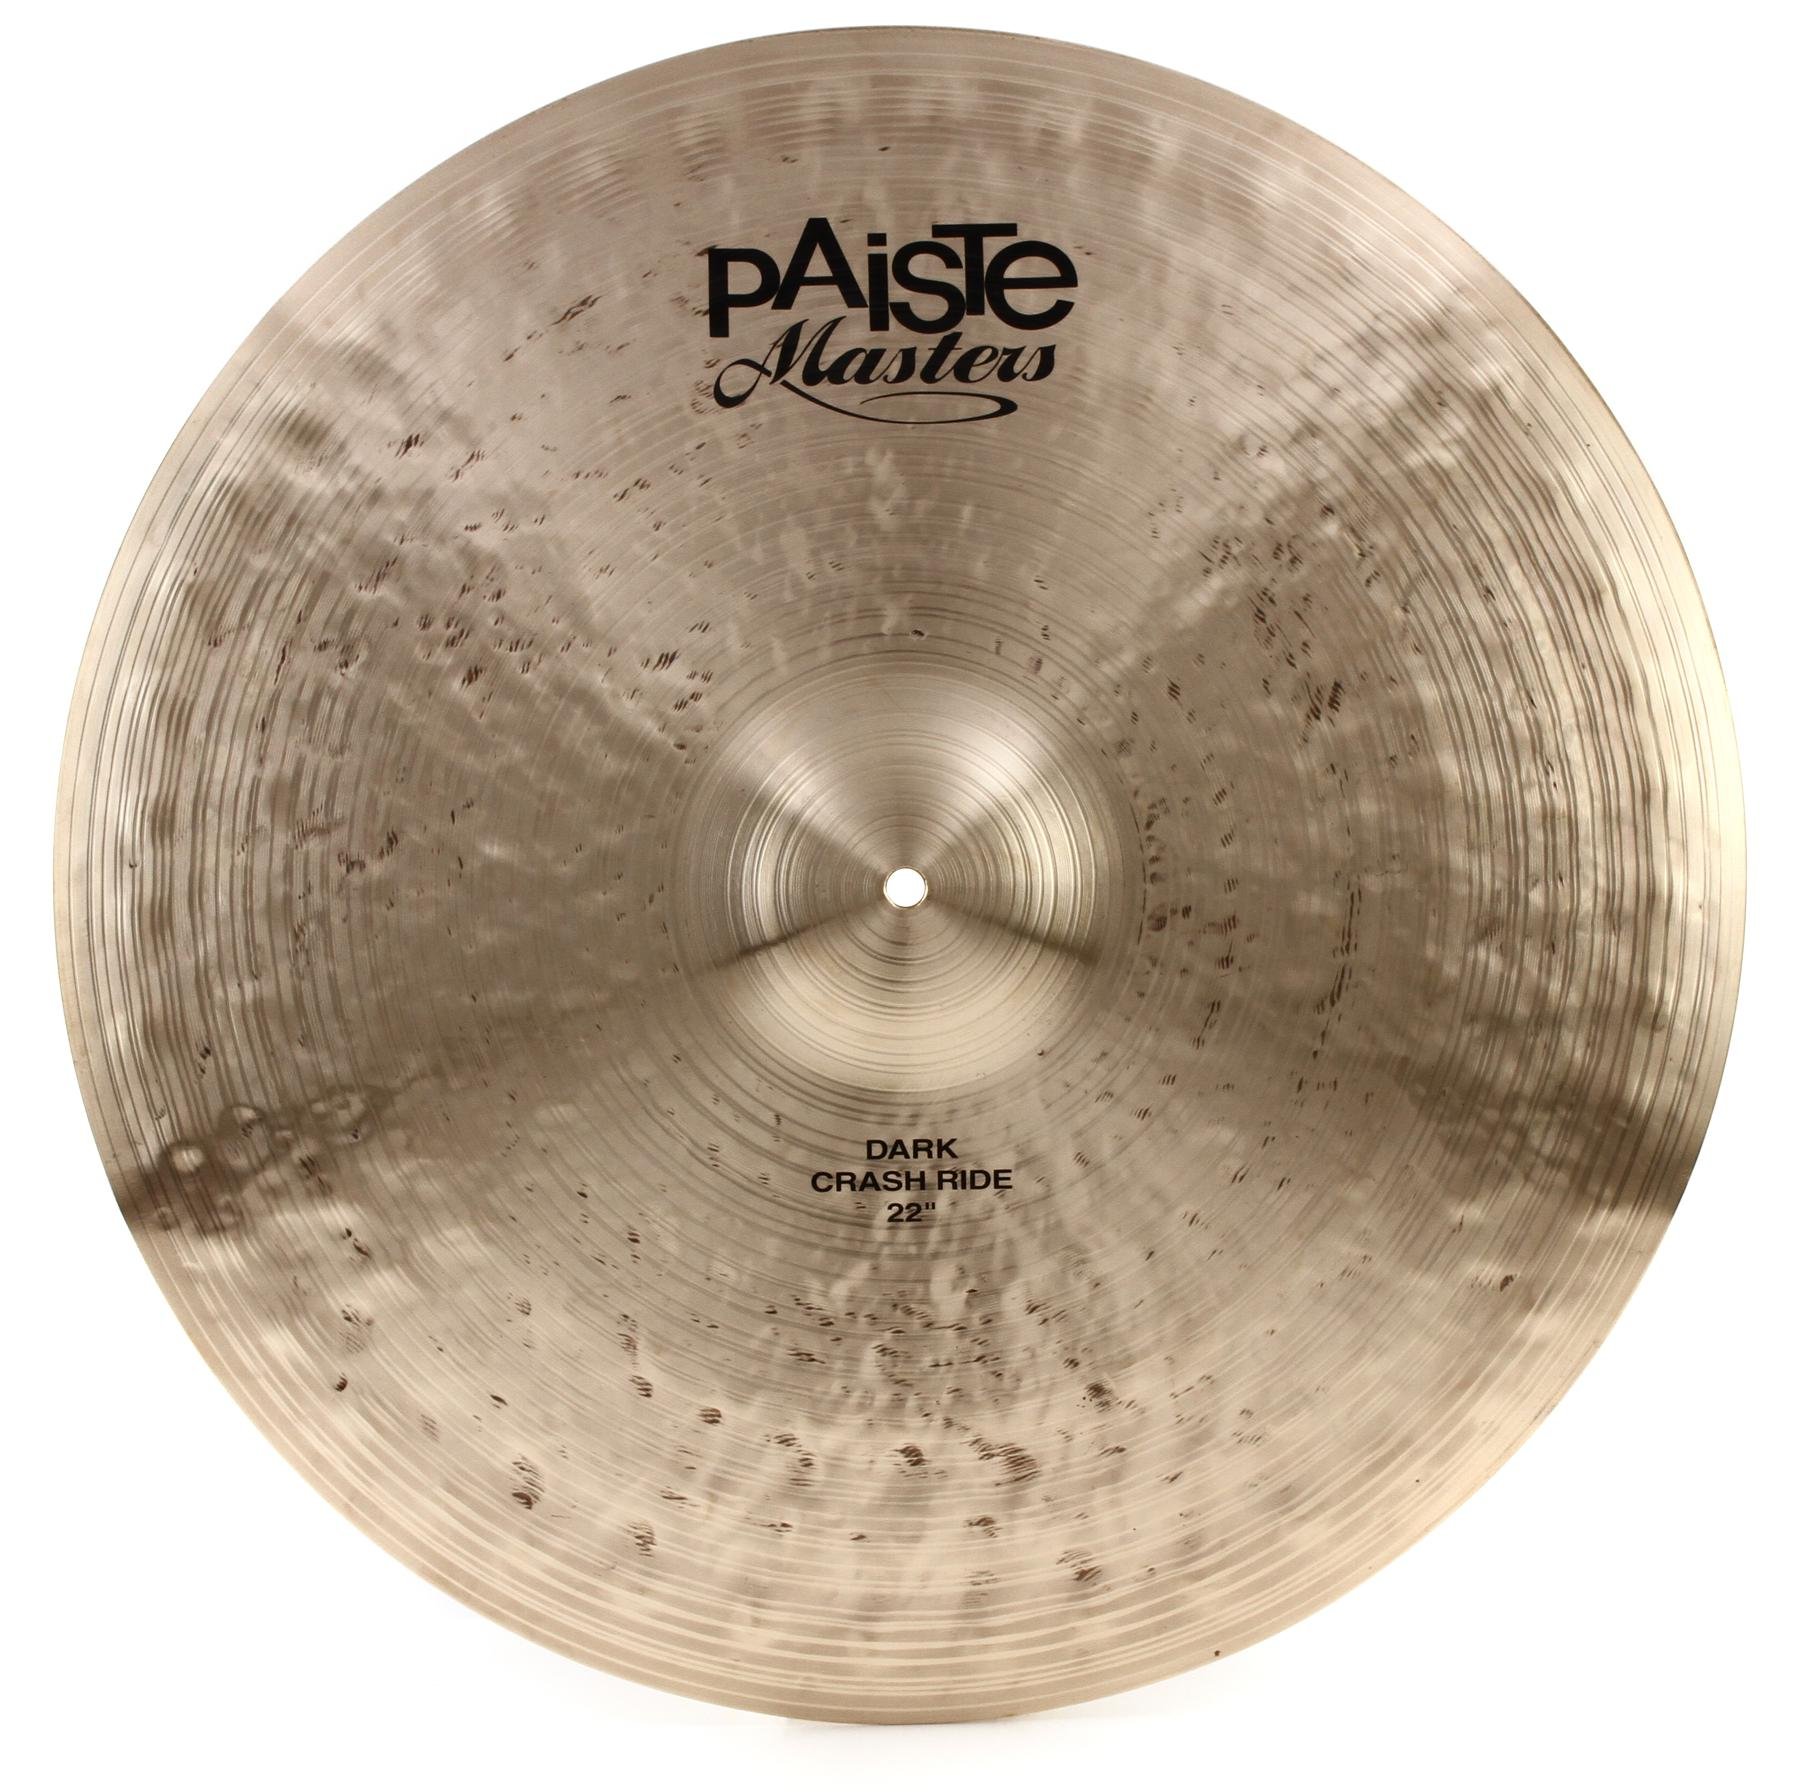 Paiste 22 inch Masters Dark Crash/Ride Cymbal | Sweetwater